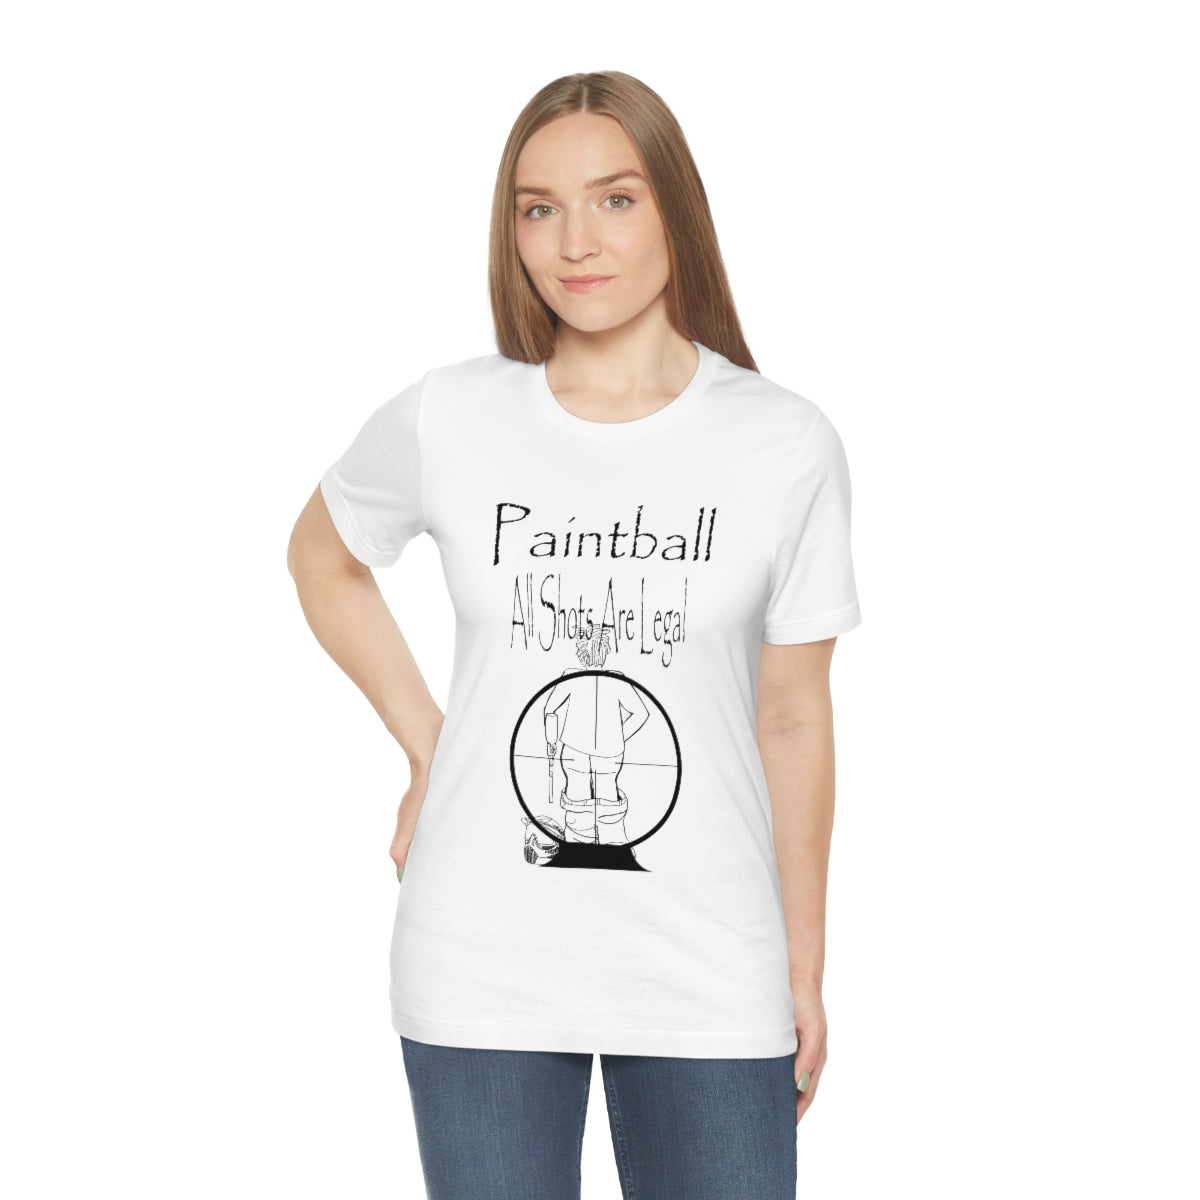 Paintball - All shots are legal - Funny Unisex Short Sleeve Tee